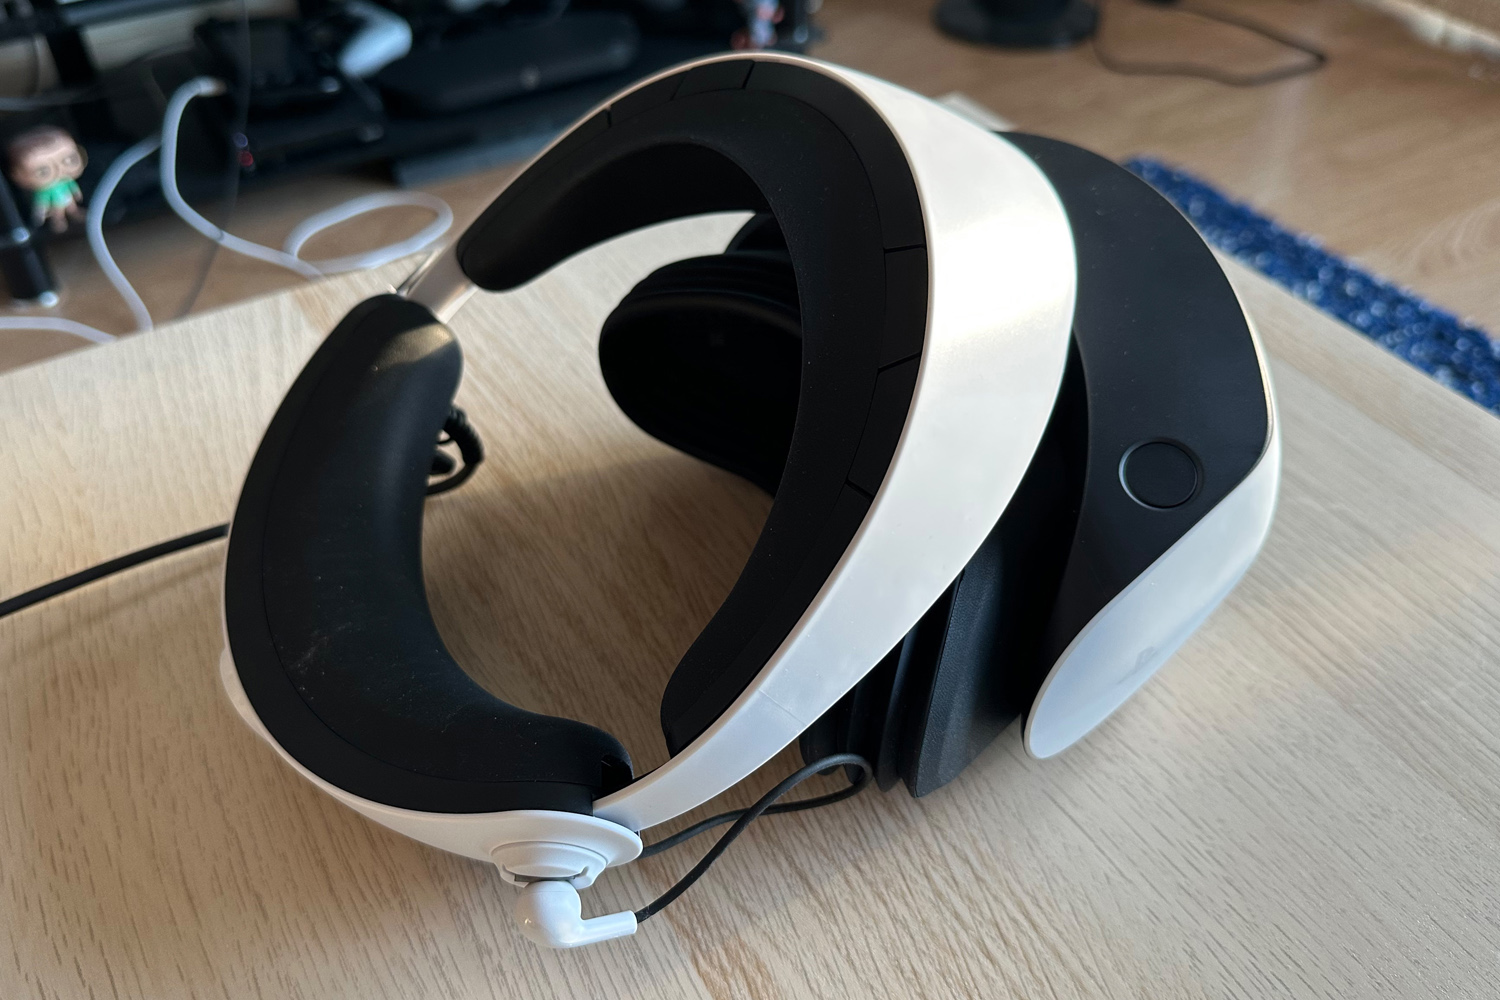 PlayStation VR 2 Review: As Impressive as It Is Expensive